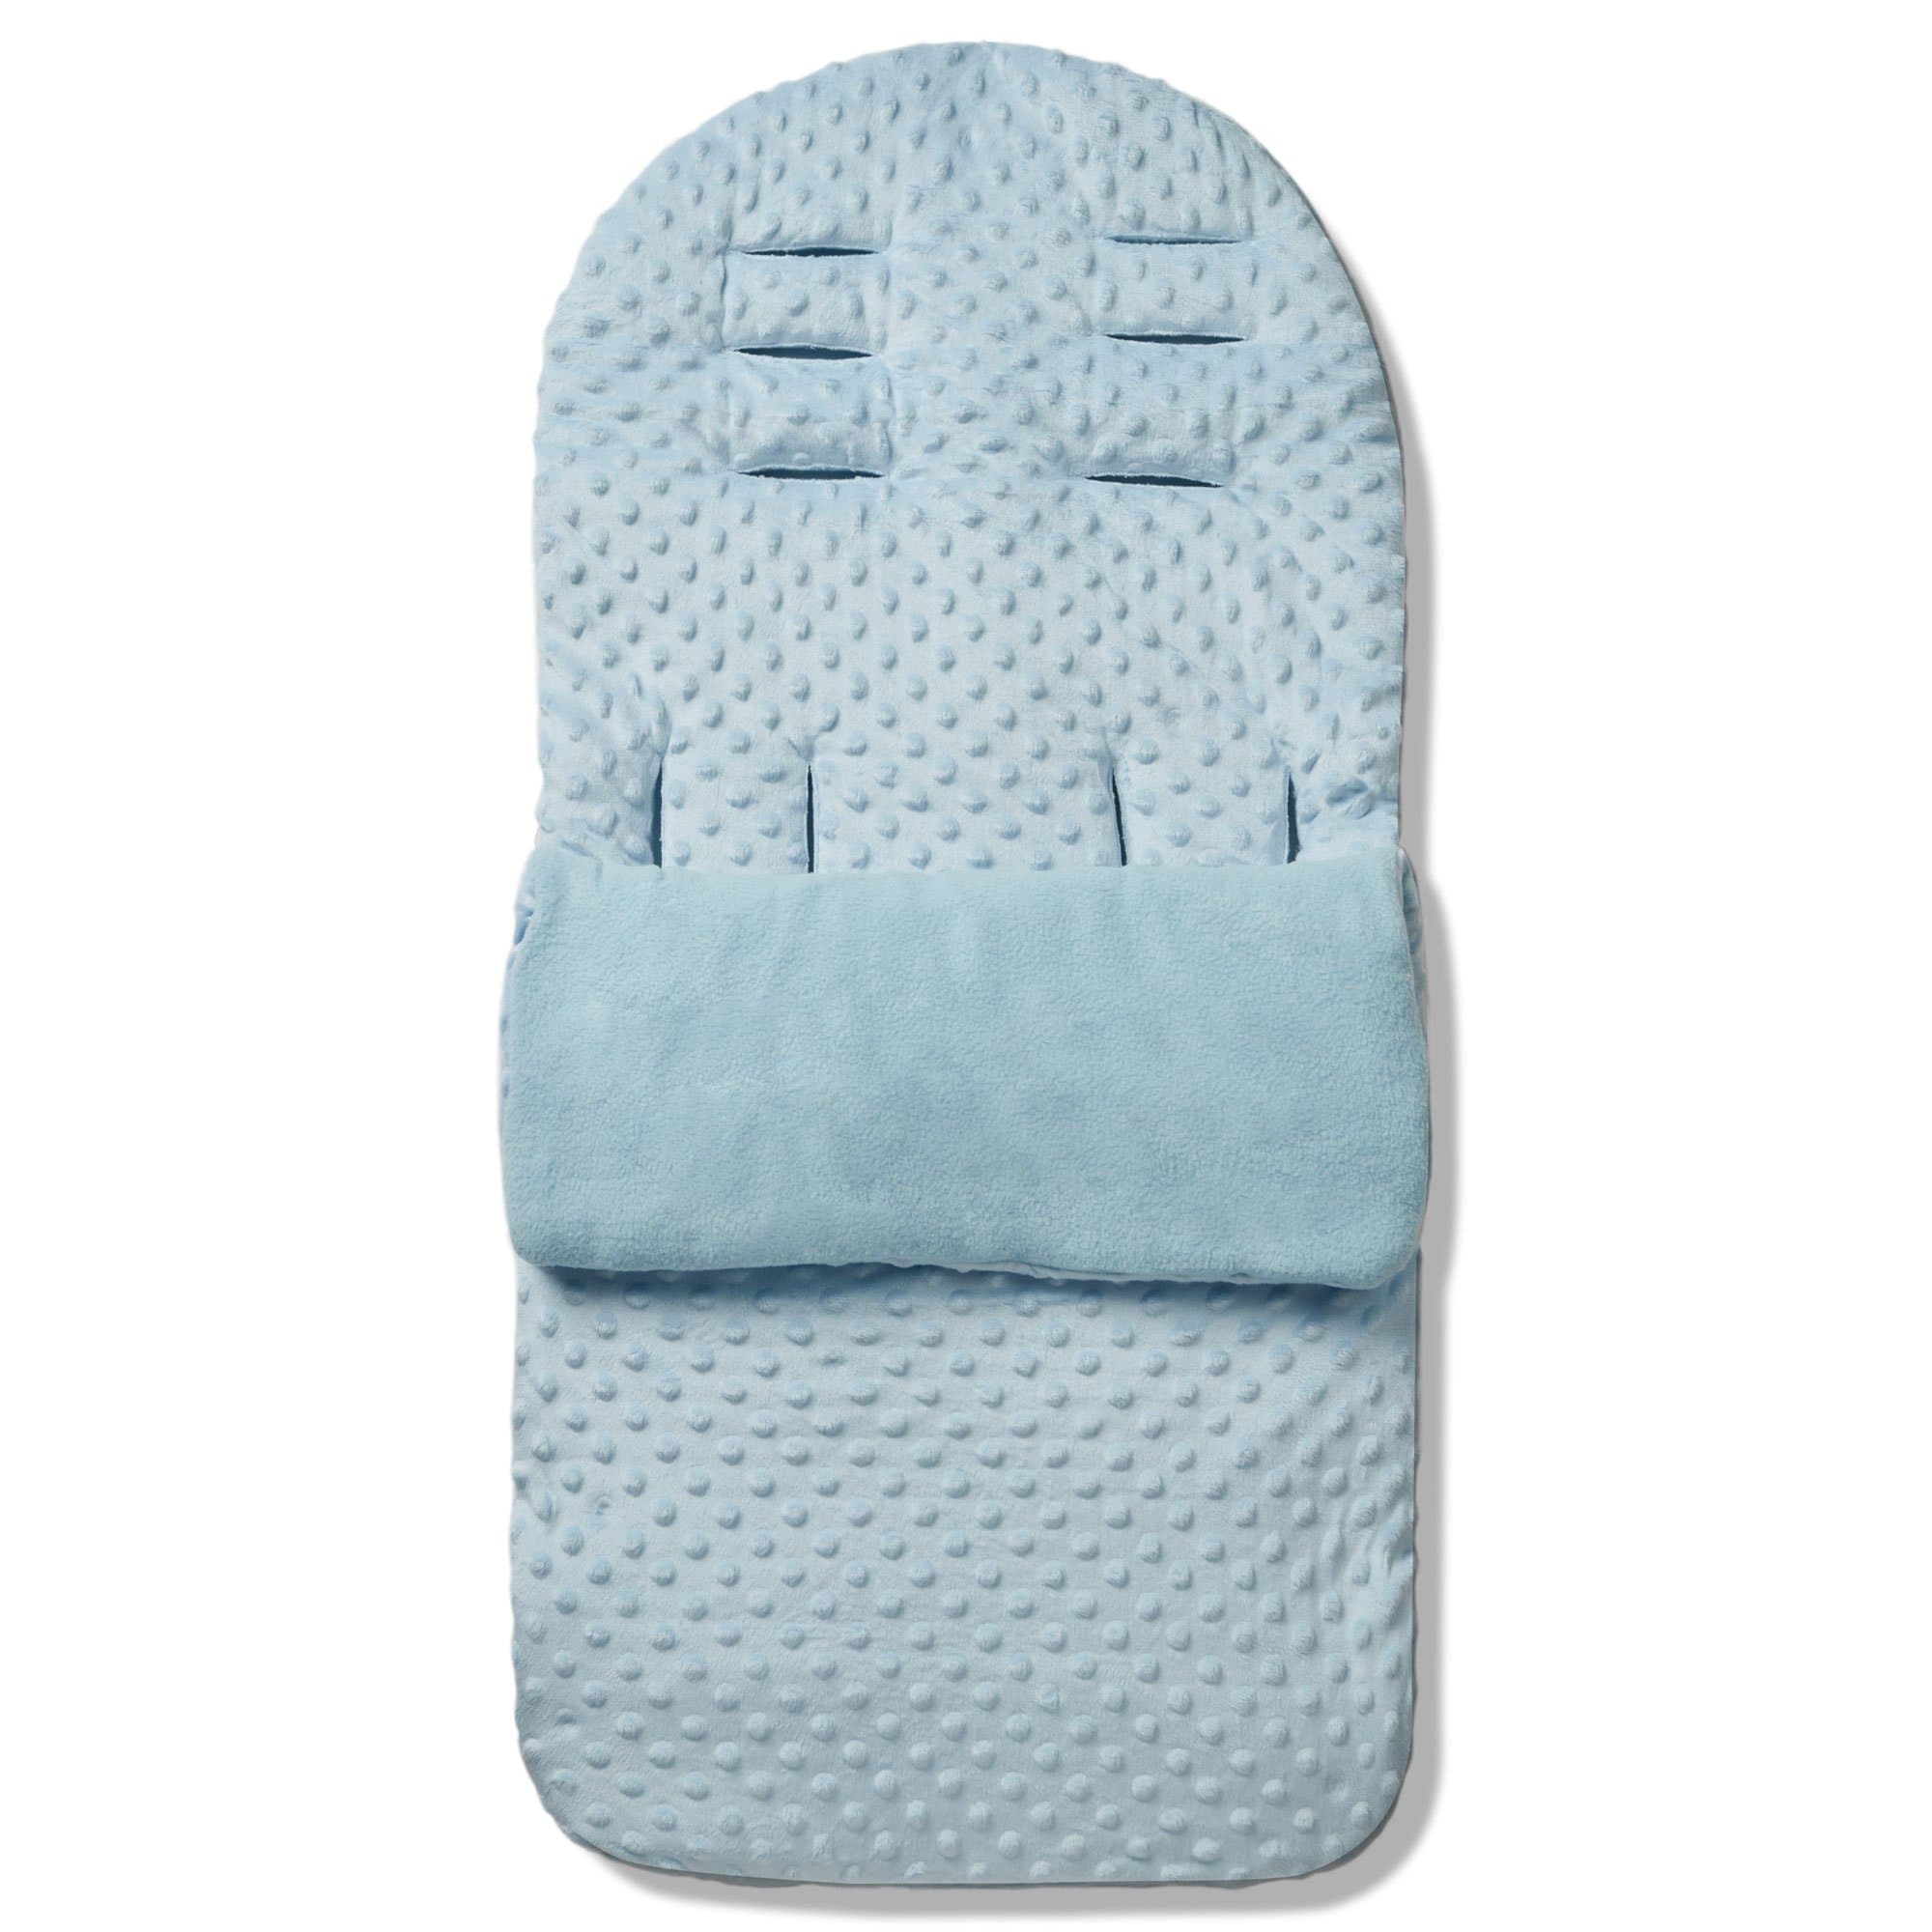 Dimple Footmuff / Cosy Toes Compatible with Mamas & Papas - Blue / Fits All Models | For Your Little One